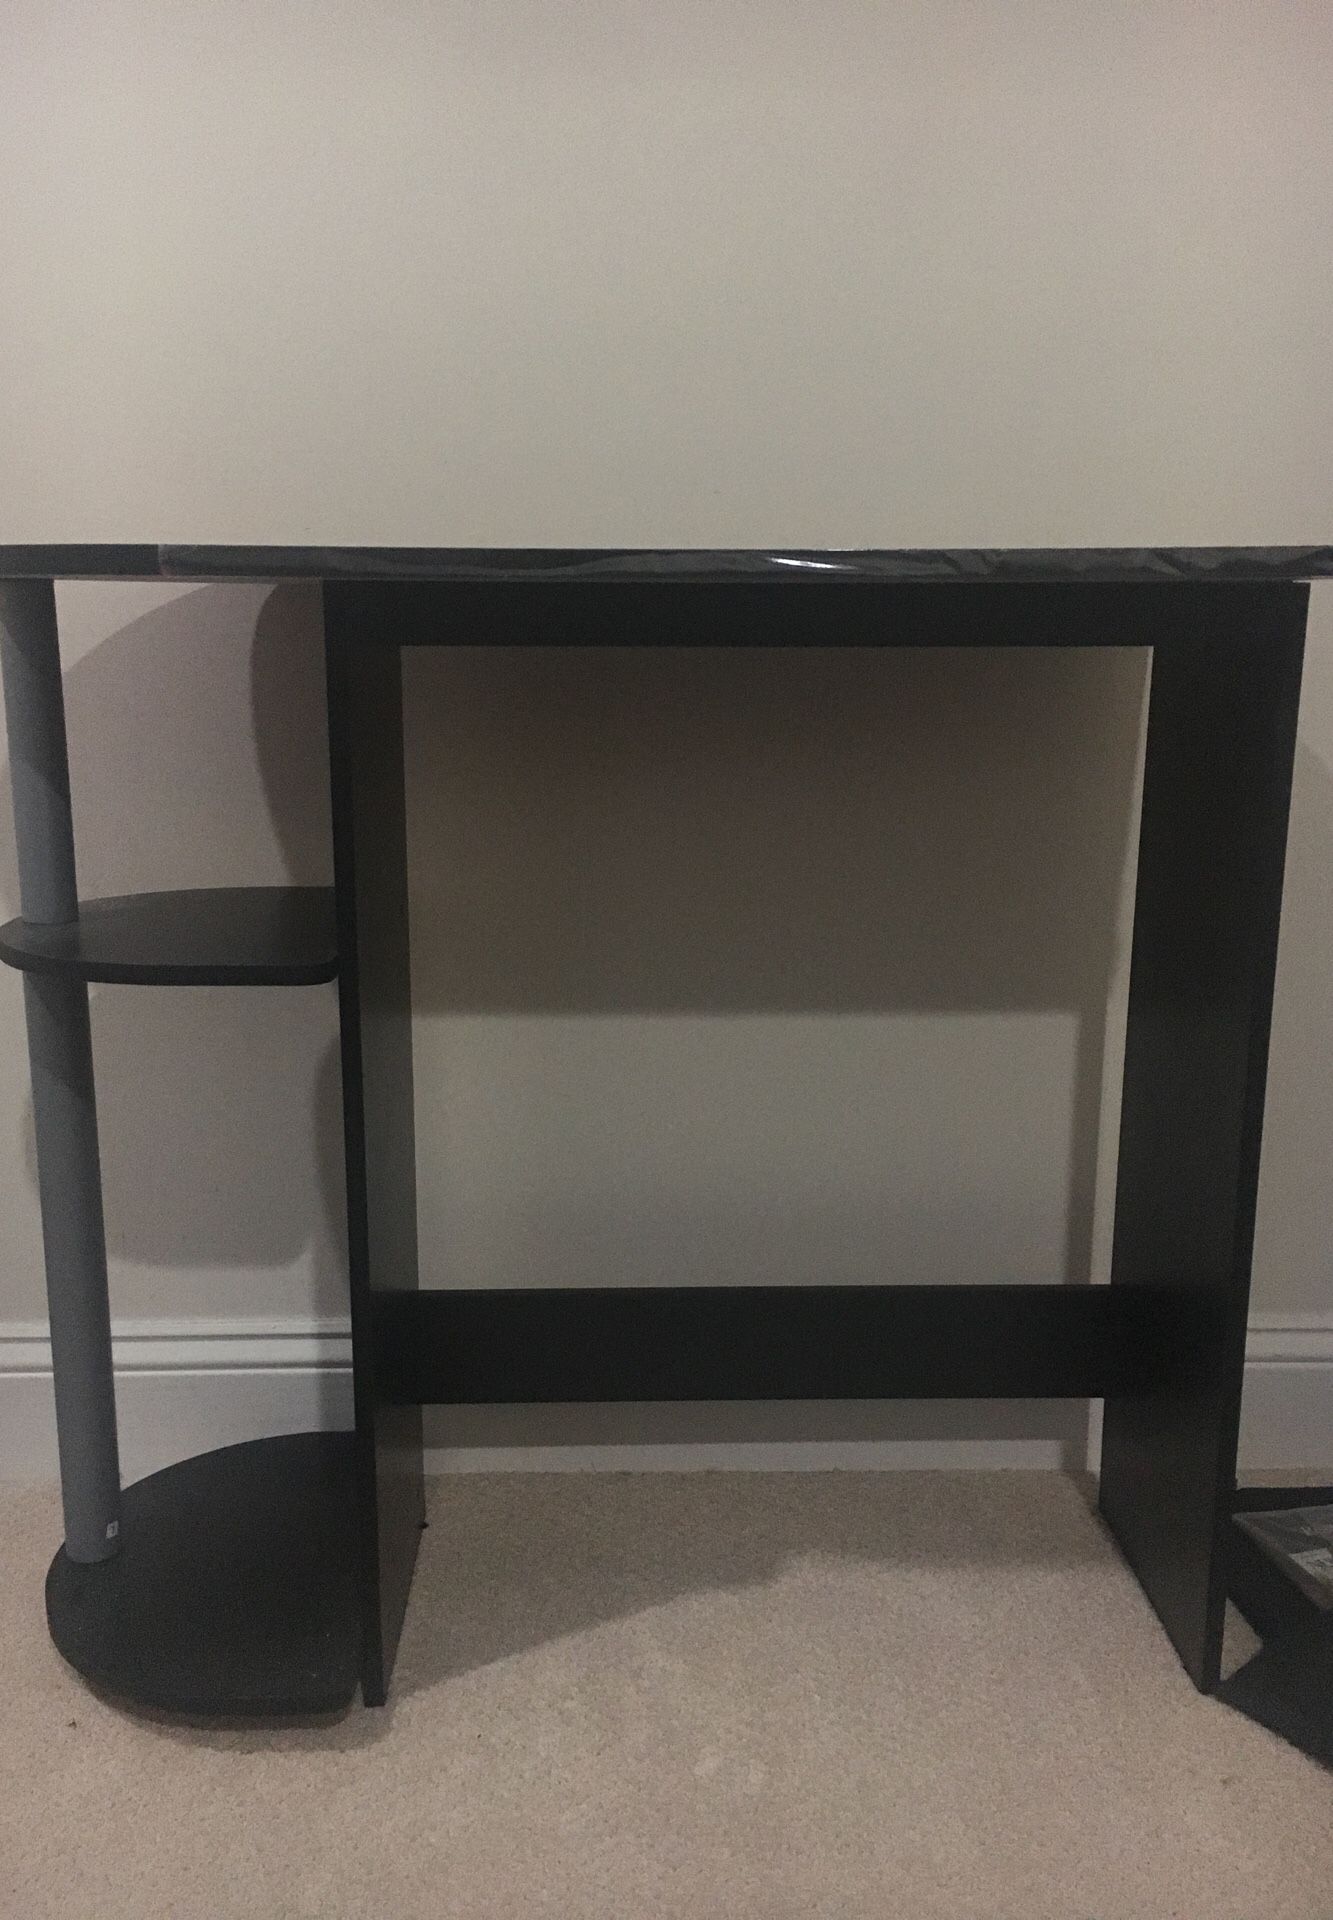 Mainstay computer desk with built in shelves